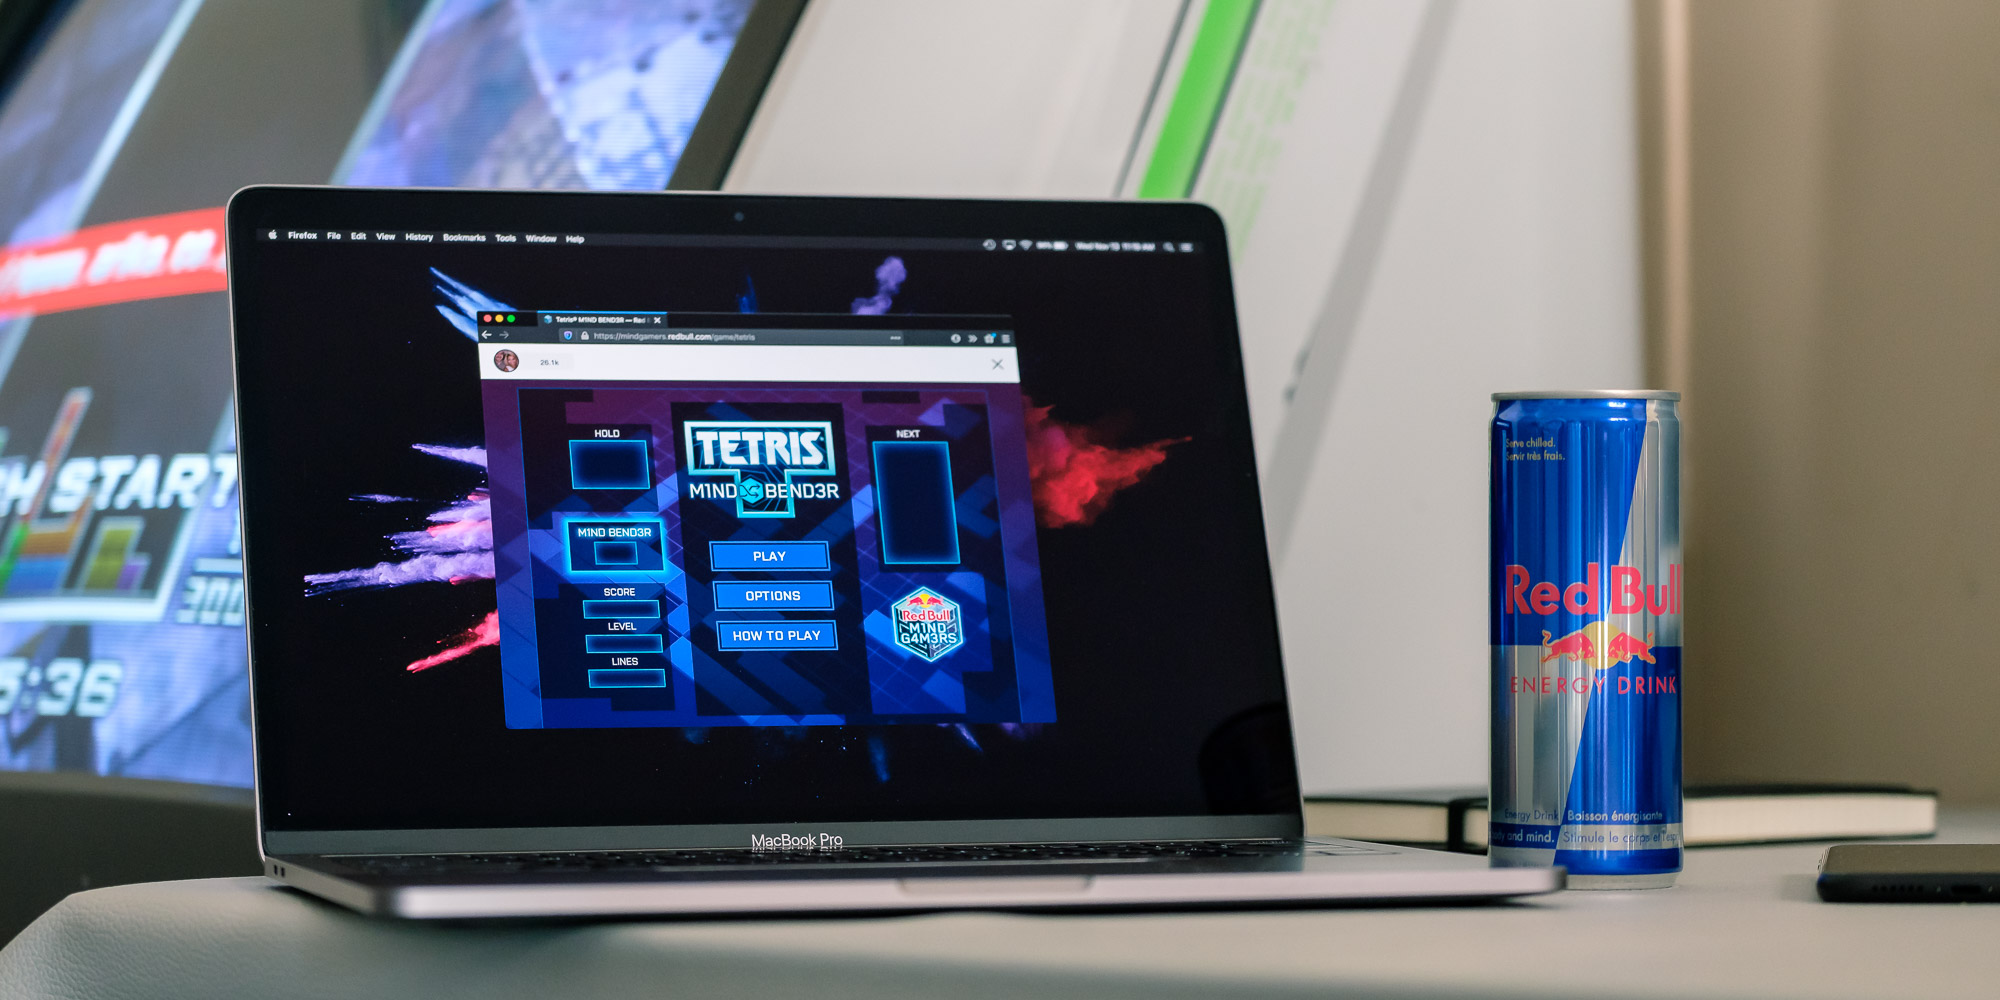 A MacBook Pro latop with the game Tetris: Mind Bender opened in windowed mode. A can of Red Bull is next to the laptop. Behind the laptop a Sega Astro City with the game Tetris: The Absolute - The Grand Master 2 PLUS is playing the attract mode.